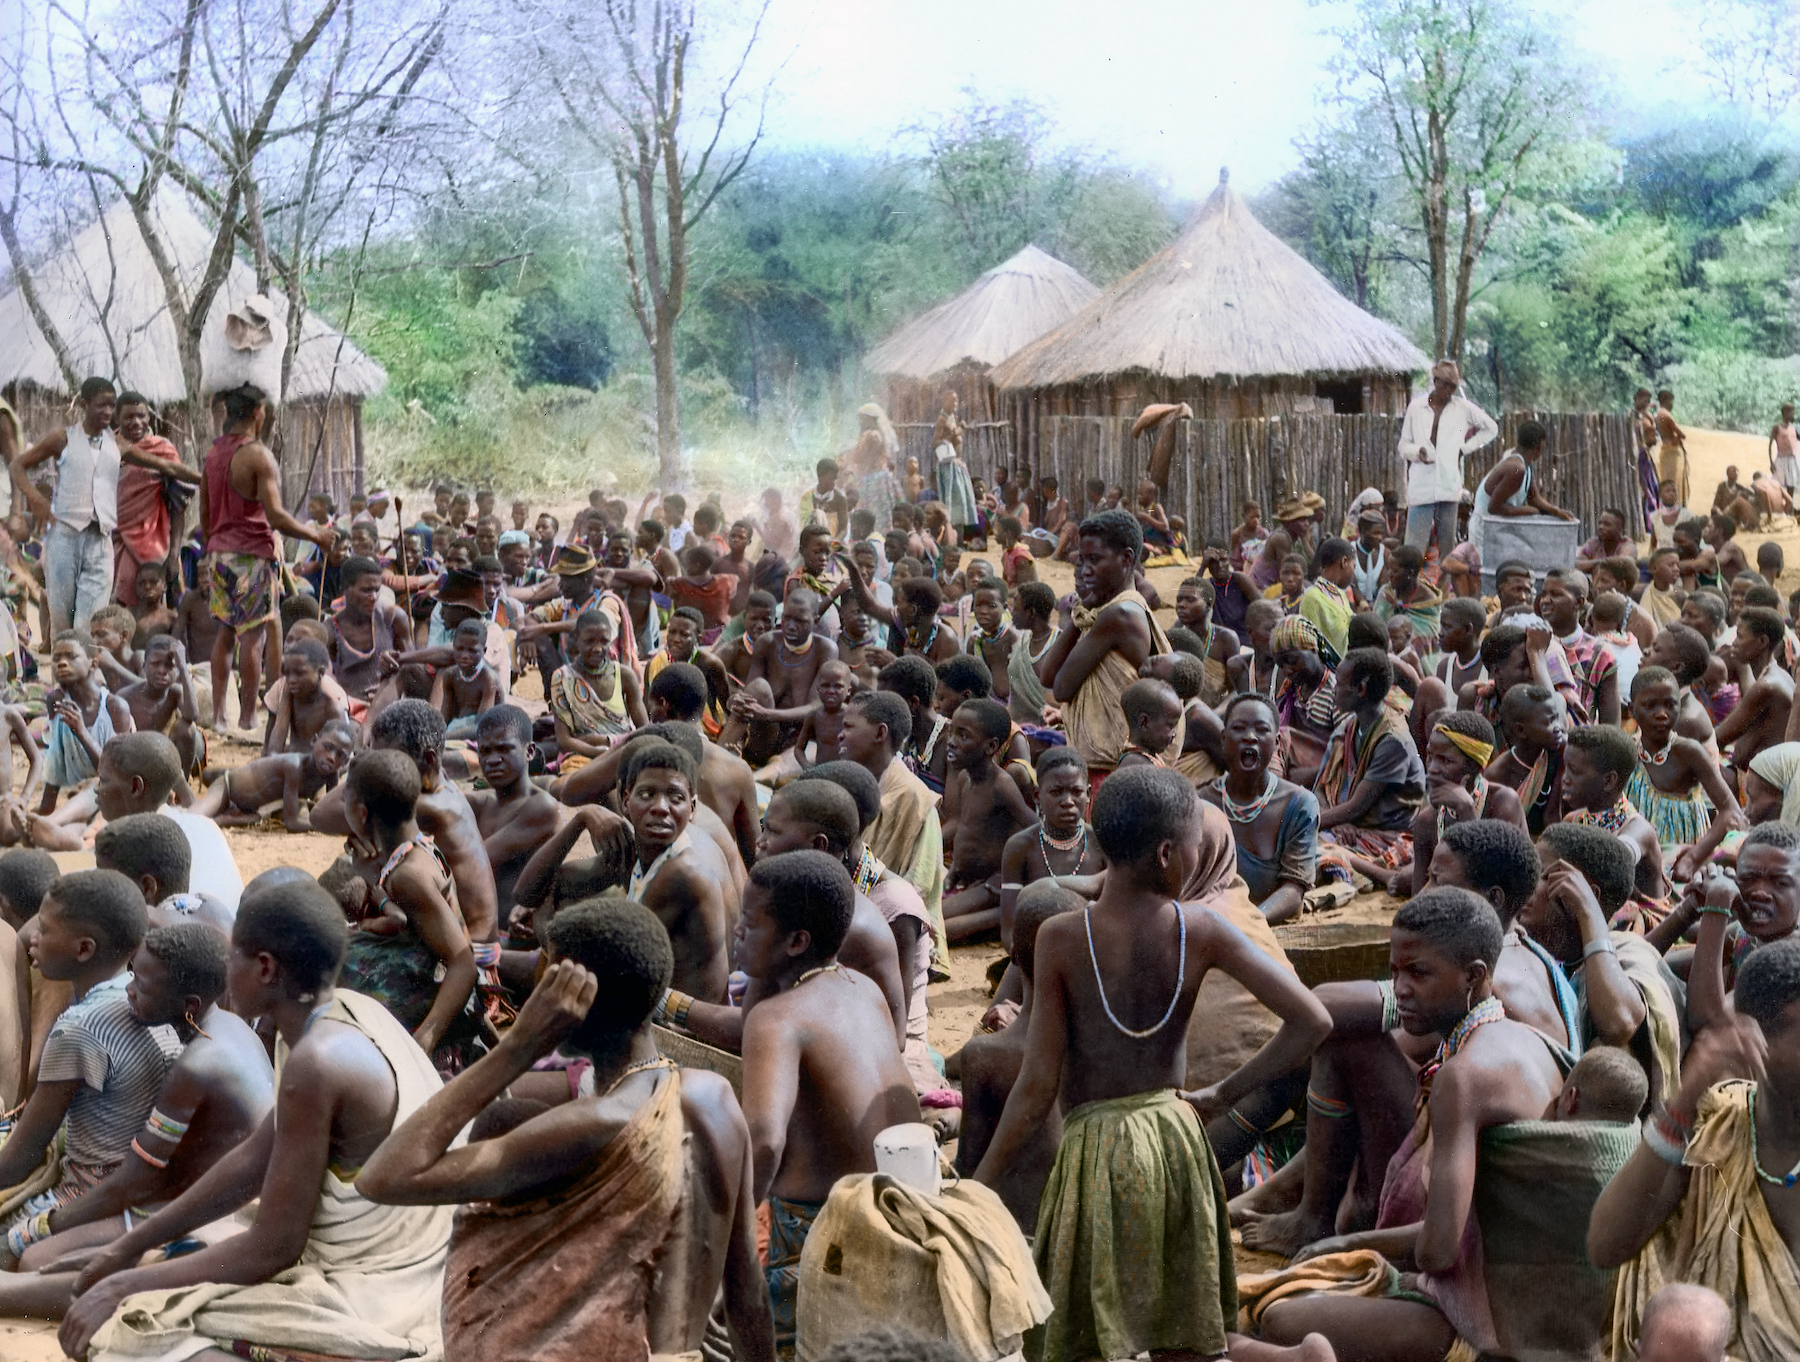 Angolan refugees wait for daily rations in Etsha settlement, Botswana, in 1969. Colourized picture